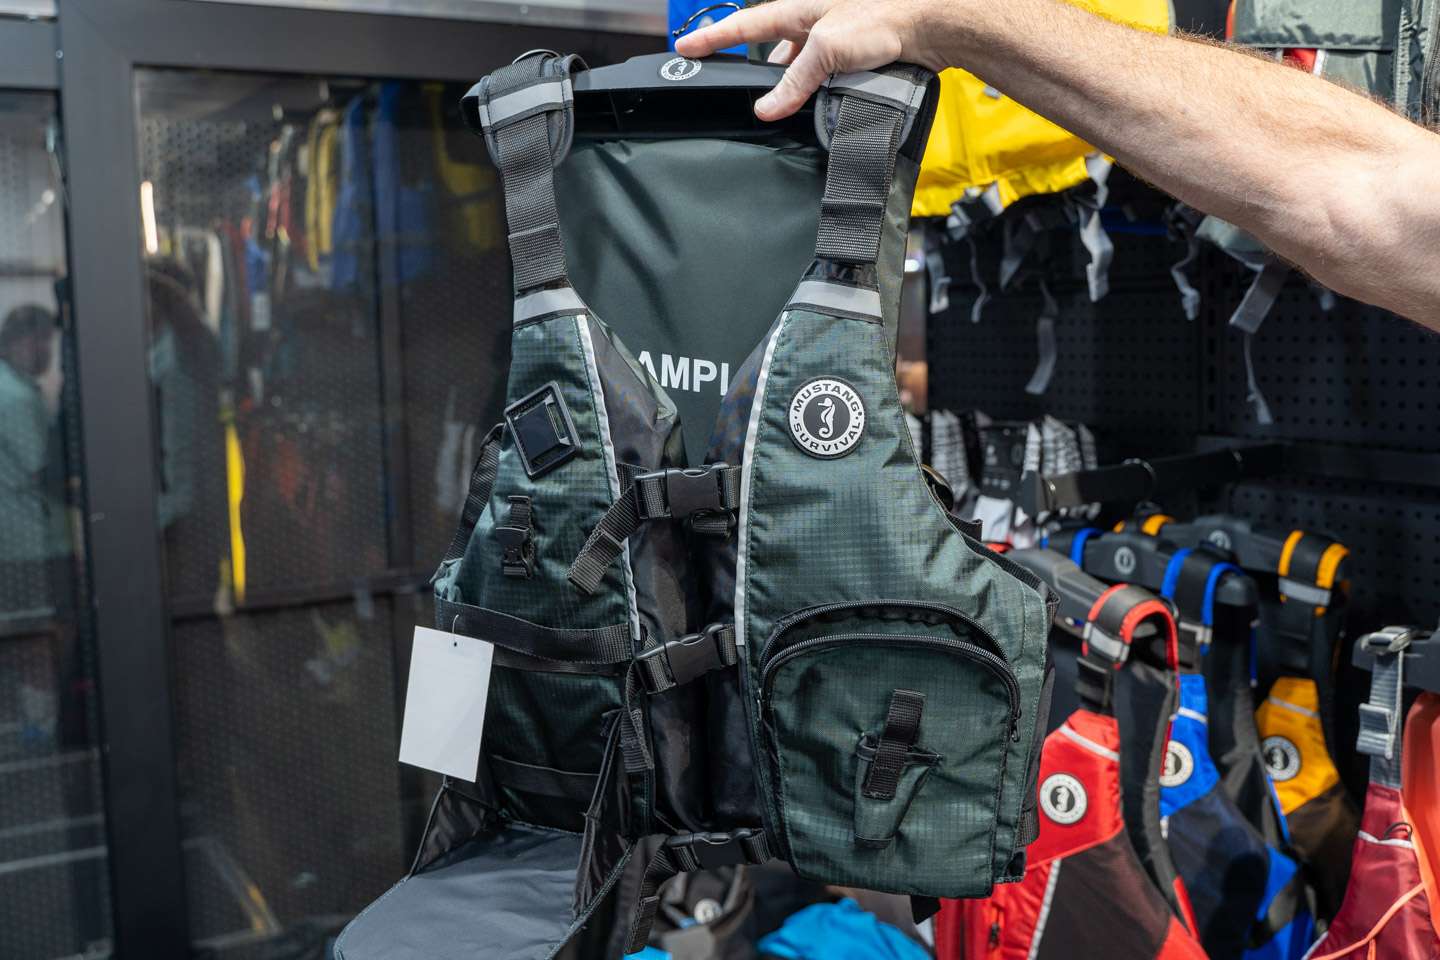 Mustang Survival offers a few new options for kayak specific life jackets. The Universal Fishing Jacket offers endless features that are tailored to the kayak angler.  